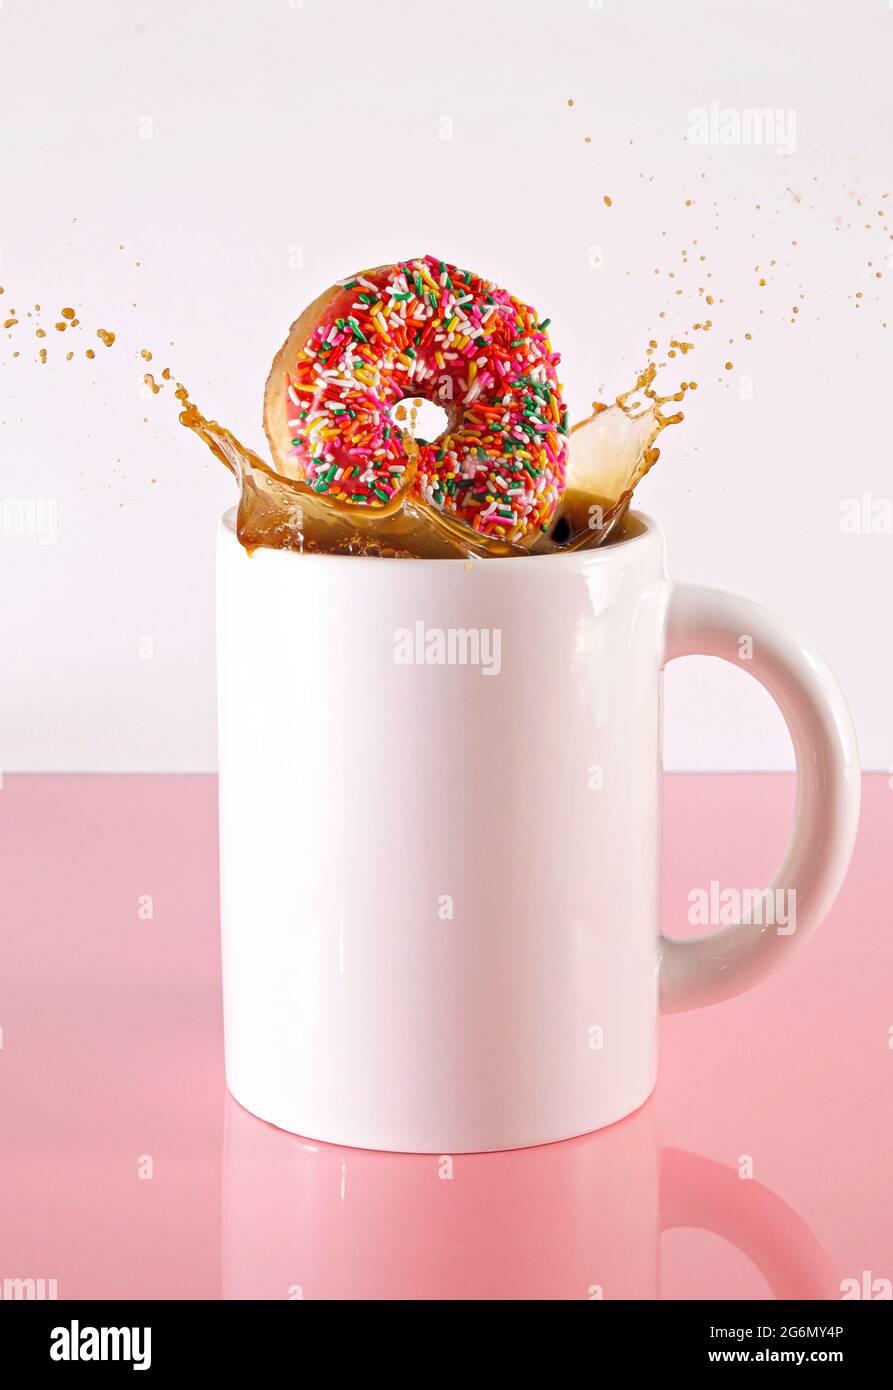 Donut Splashing in a Giant Cup of Black Coffee Stock Photo